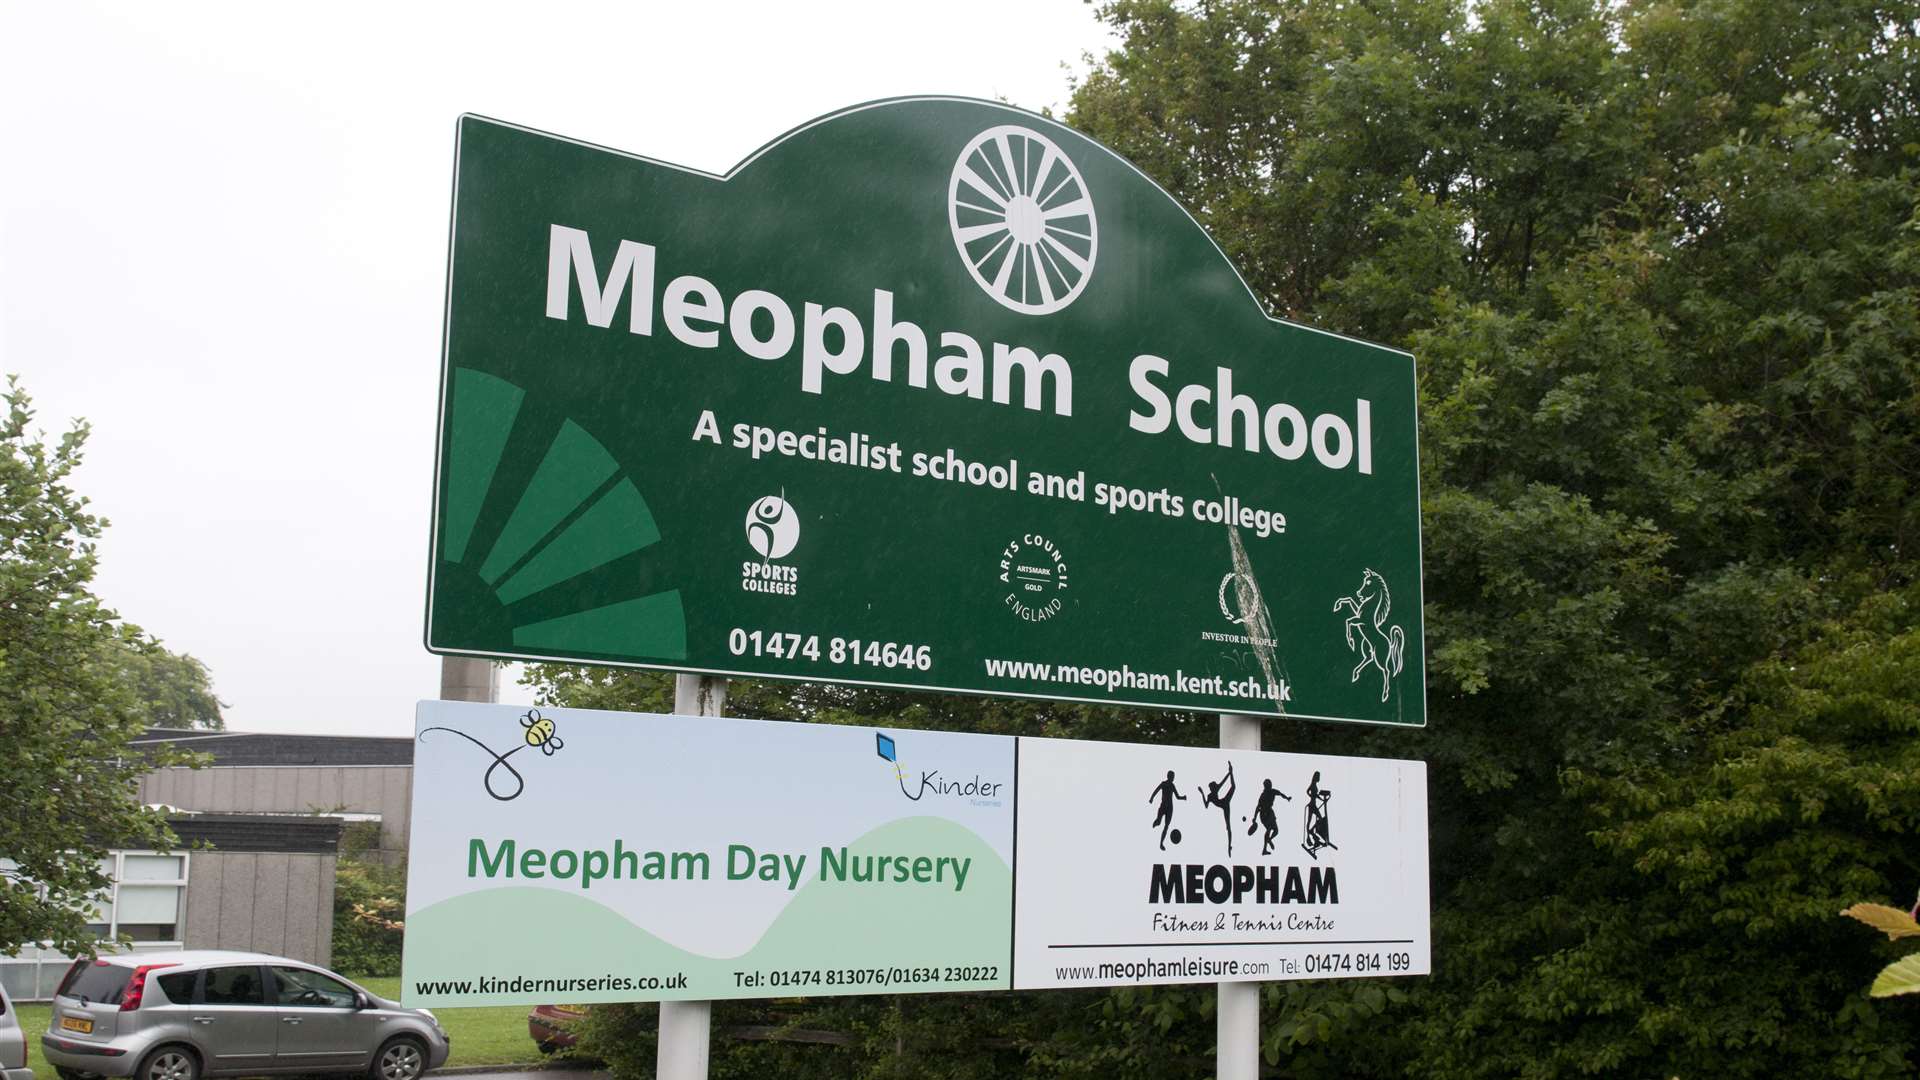 Meopham School is run by the Swale Academies Trust